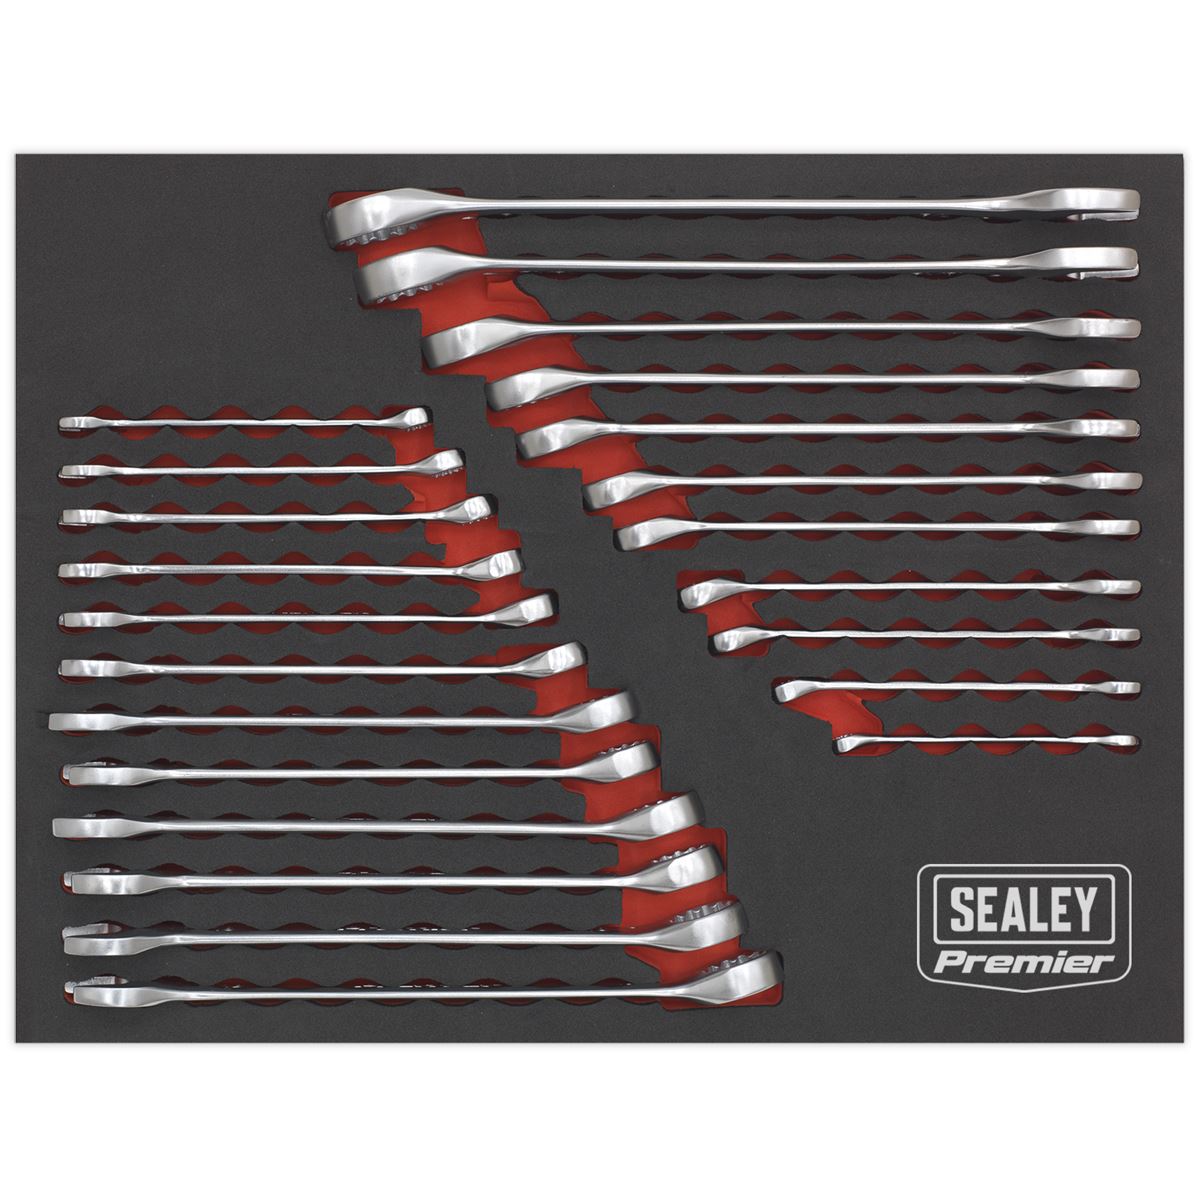 Sealey Premier 23 Piece Cold Stamped Combination Spanner Set Metric/Imperial